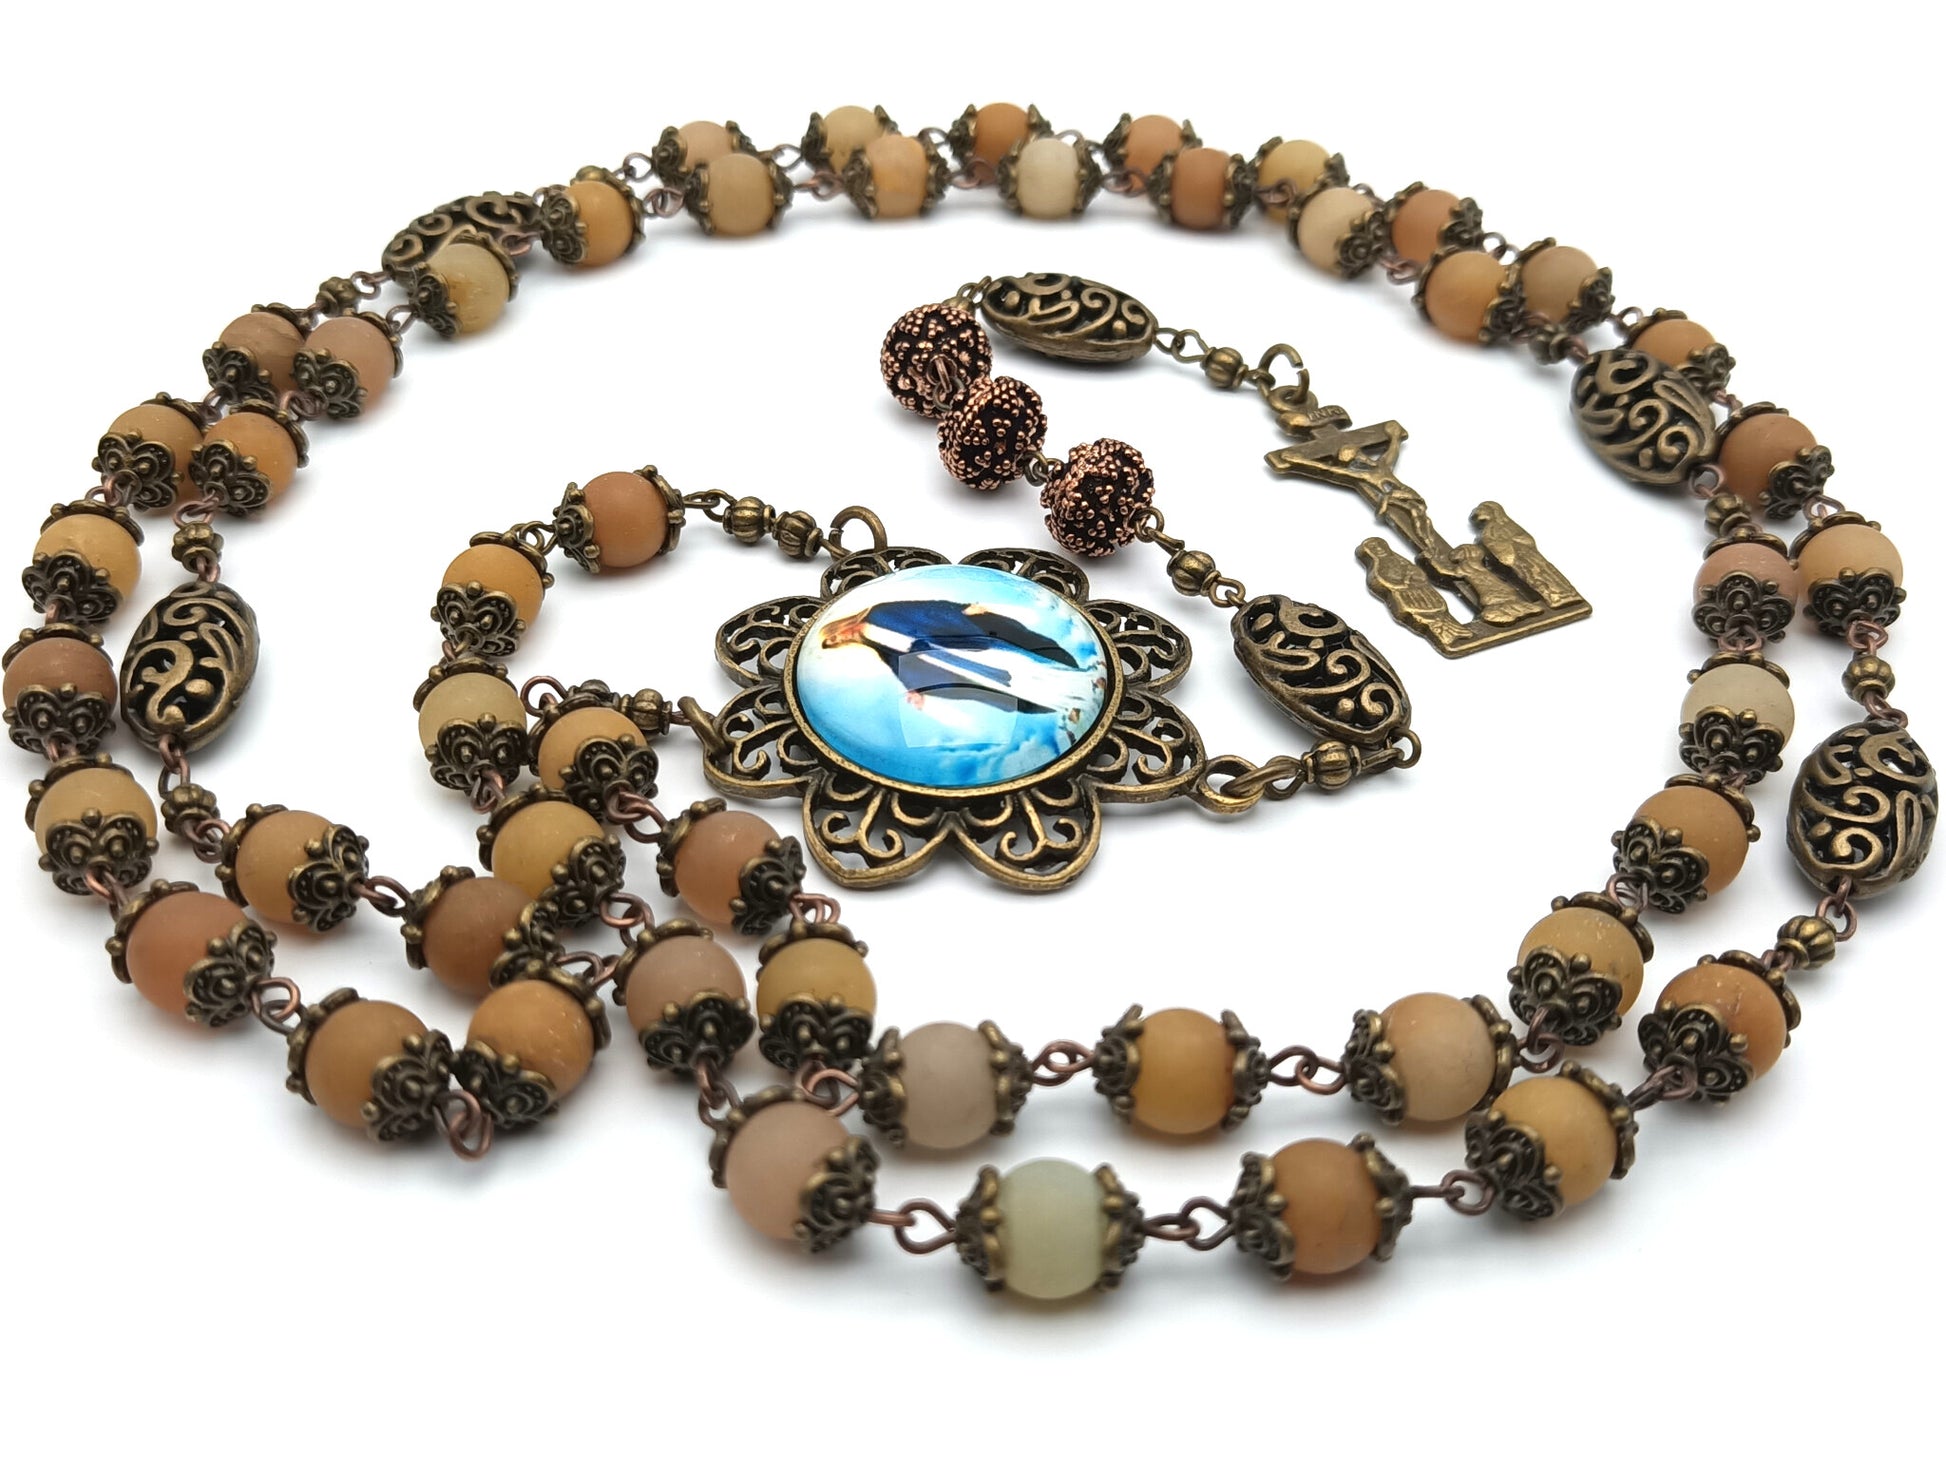 Our Lady of Grace unique rosary beads with gemstone beads, bronze two Marys crucifix, pater beads and picture centre medal.